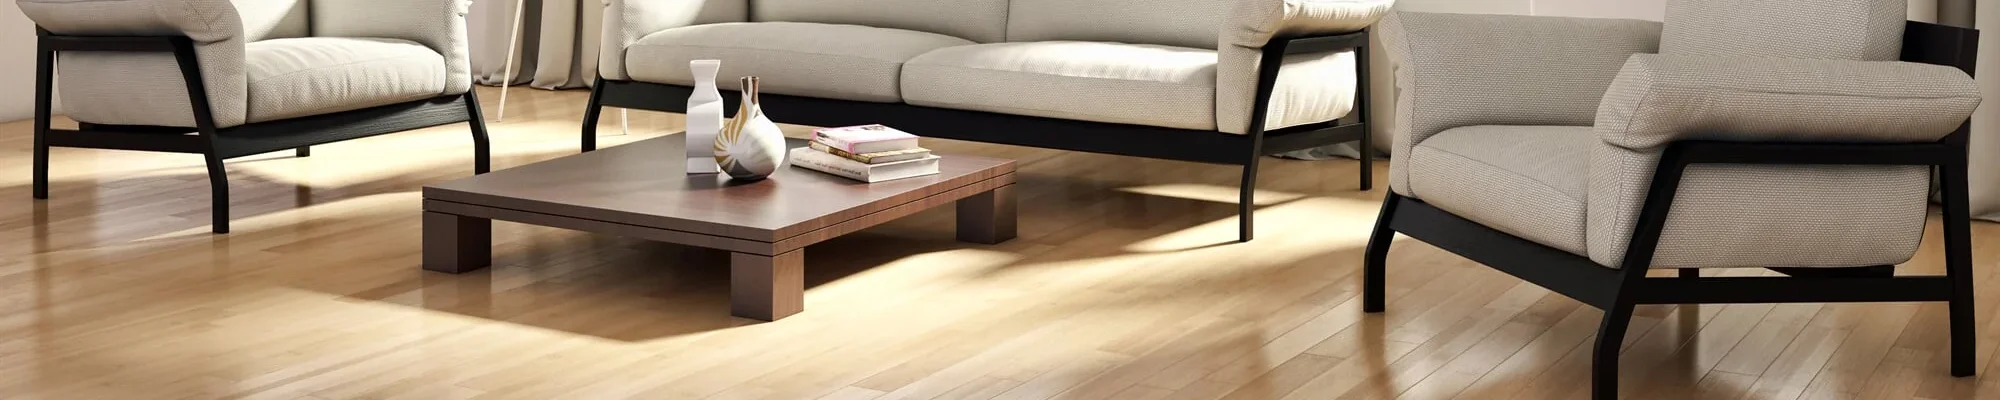 Find more about our hardwood flooring services in OH area, at Genoa Custom Interiors